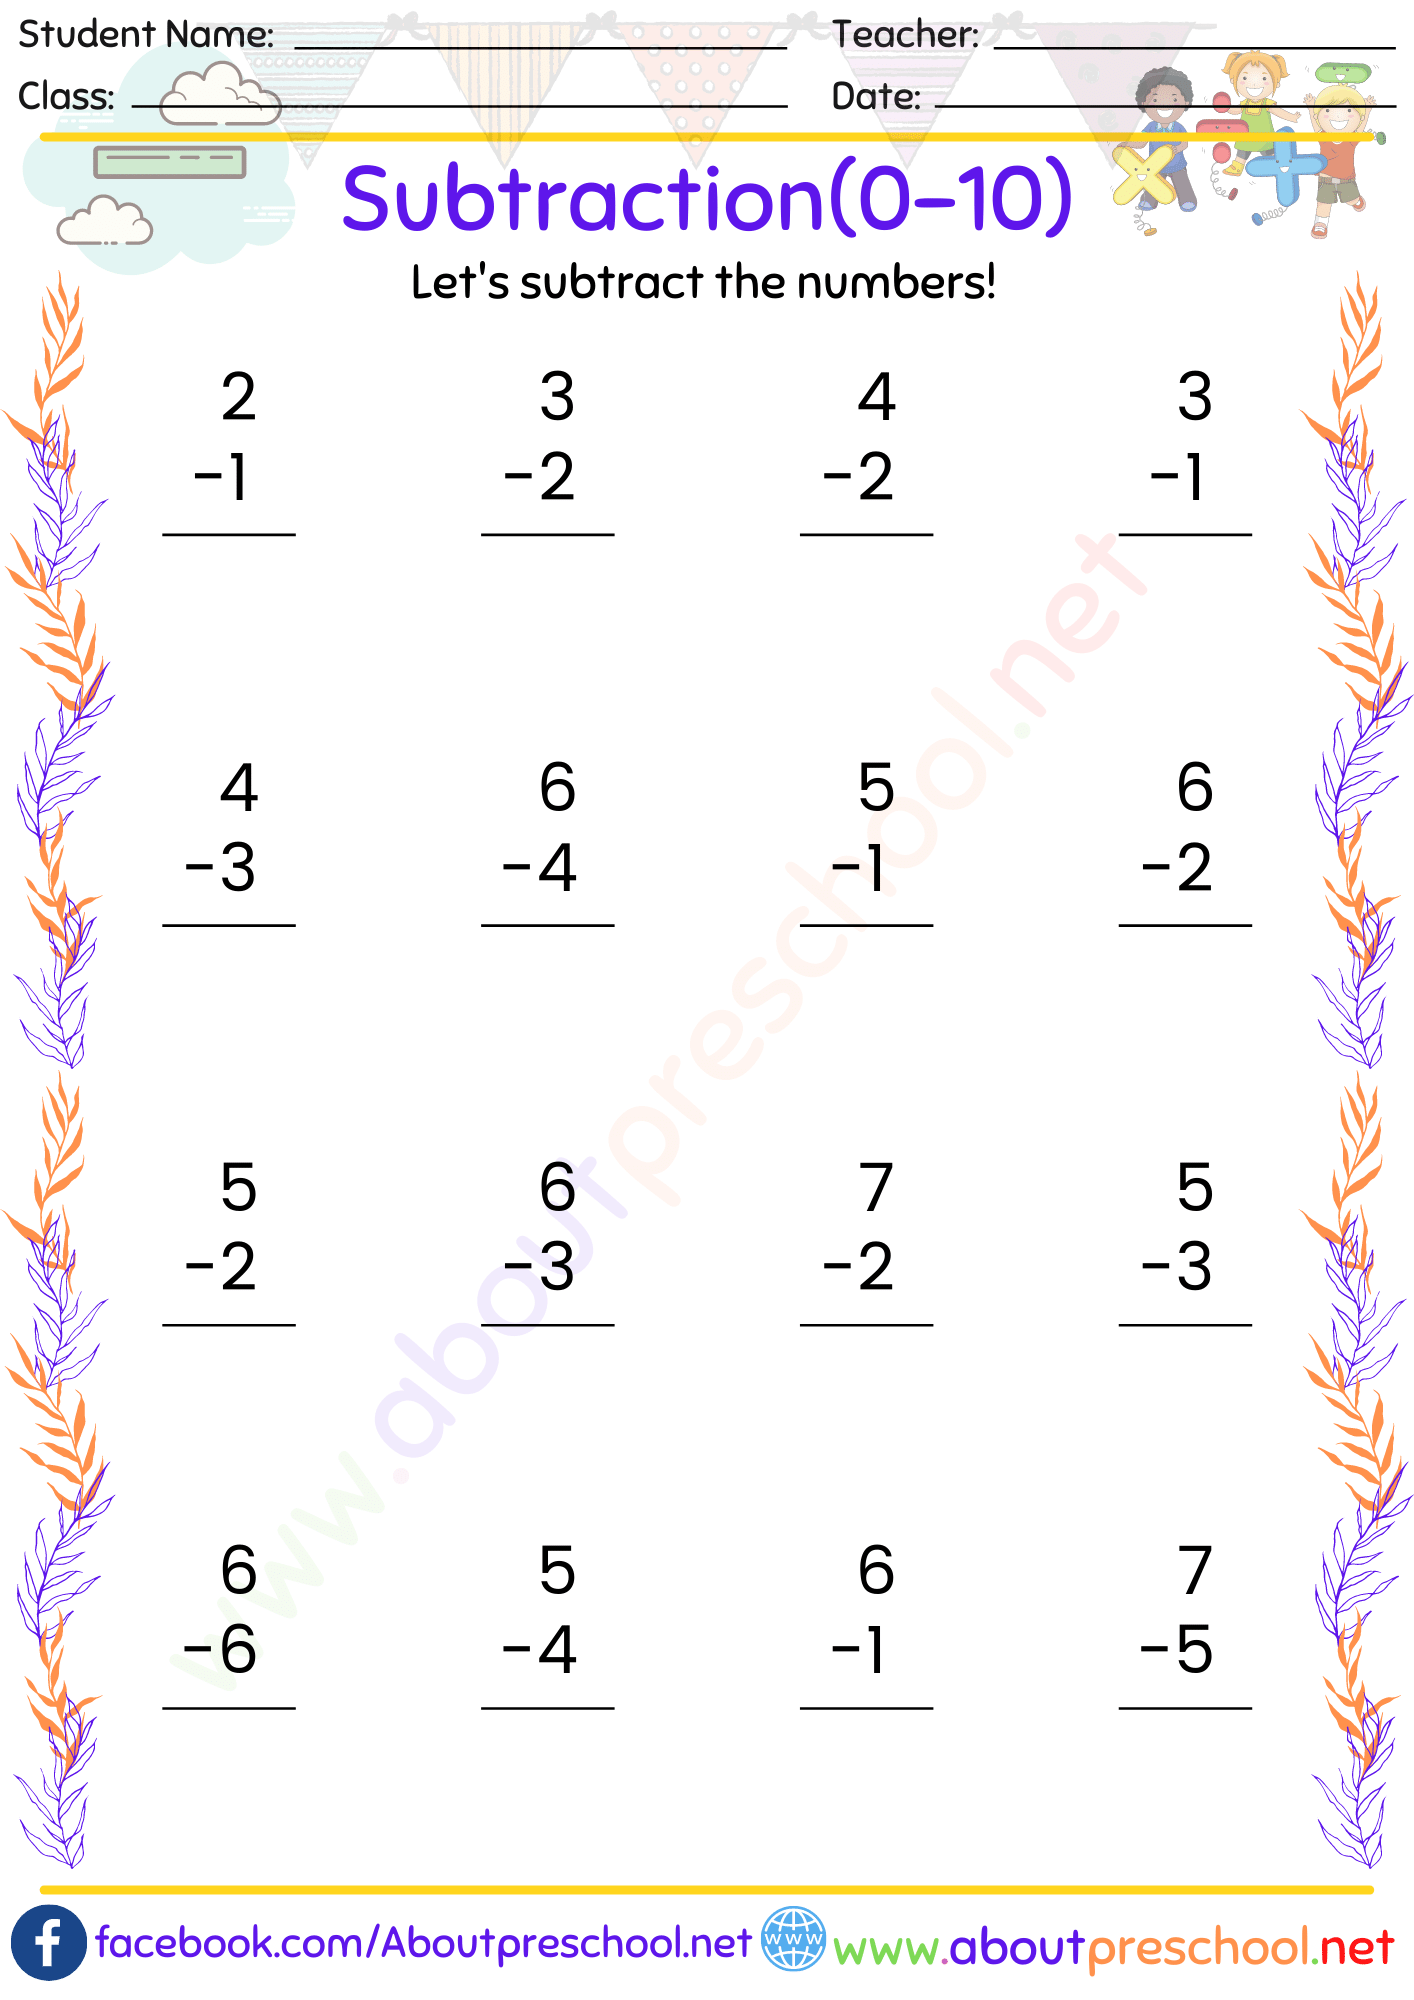 subtraction-worksheets-for-grade-1-about-preschool